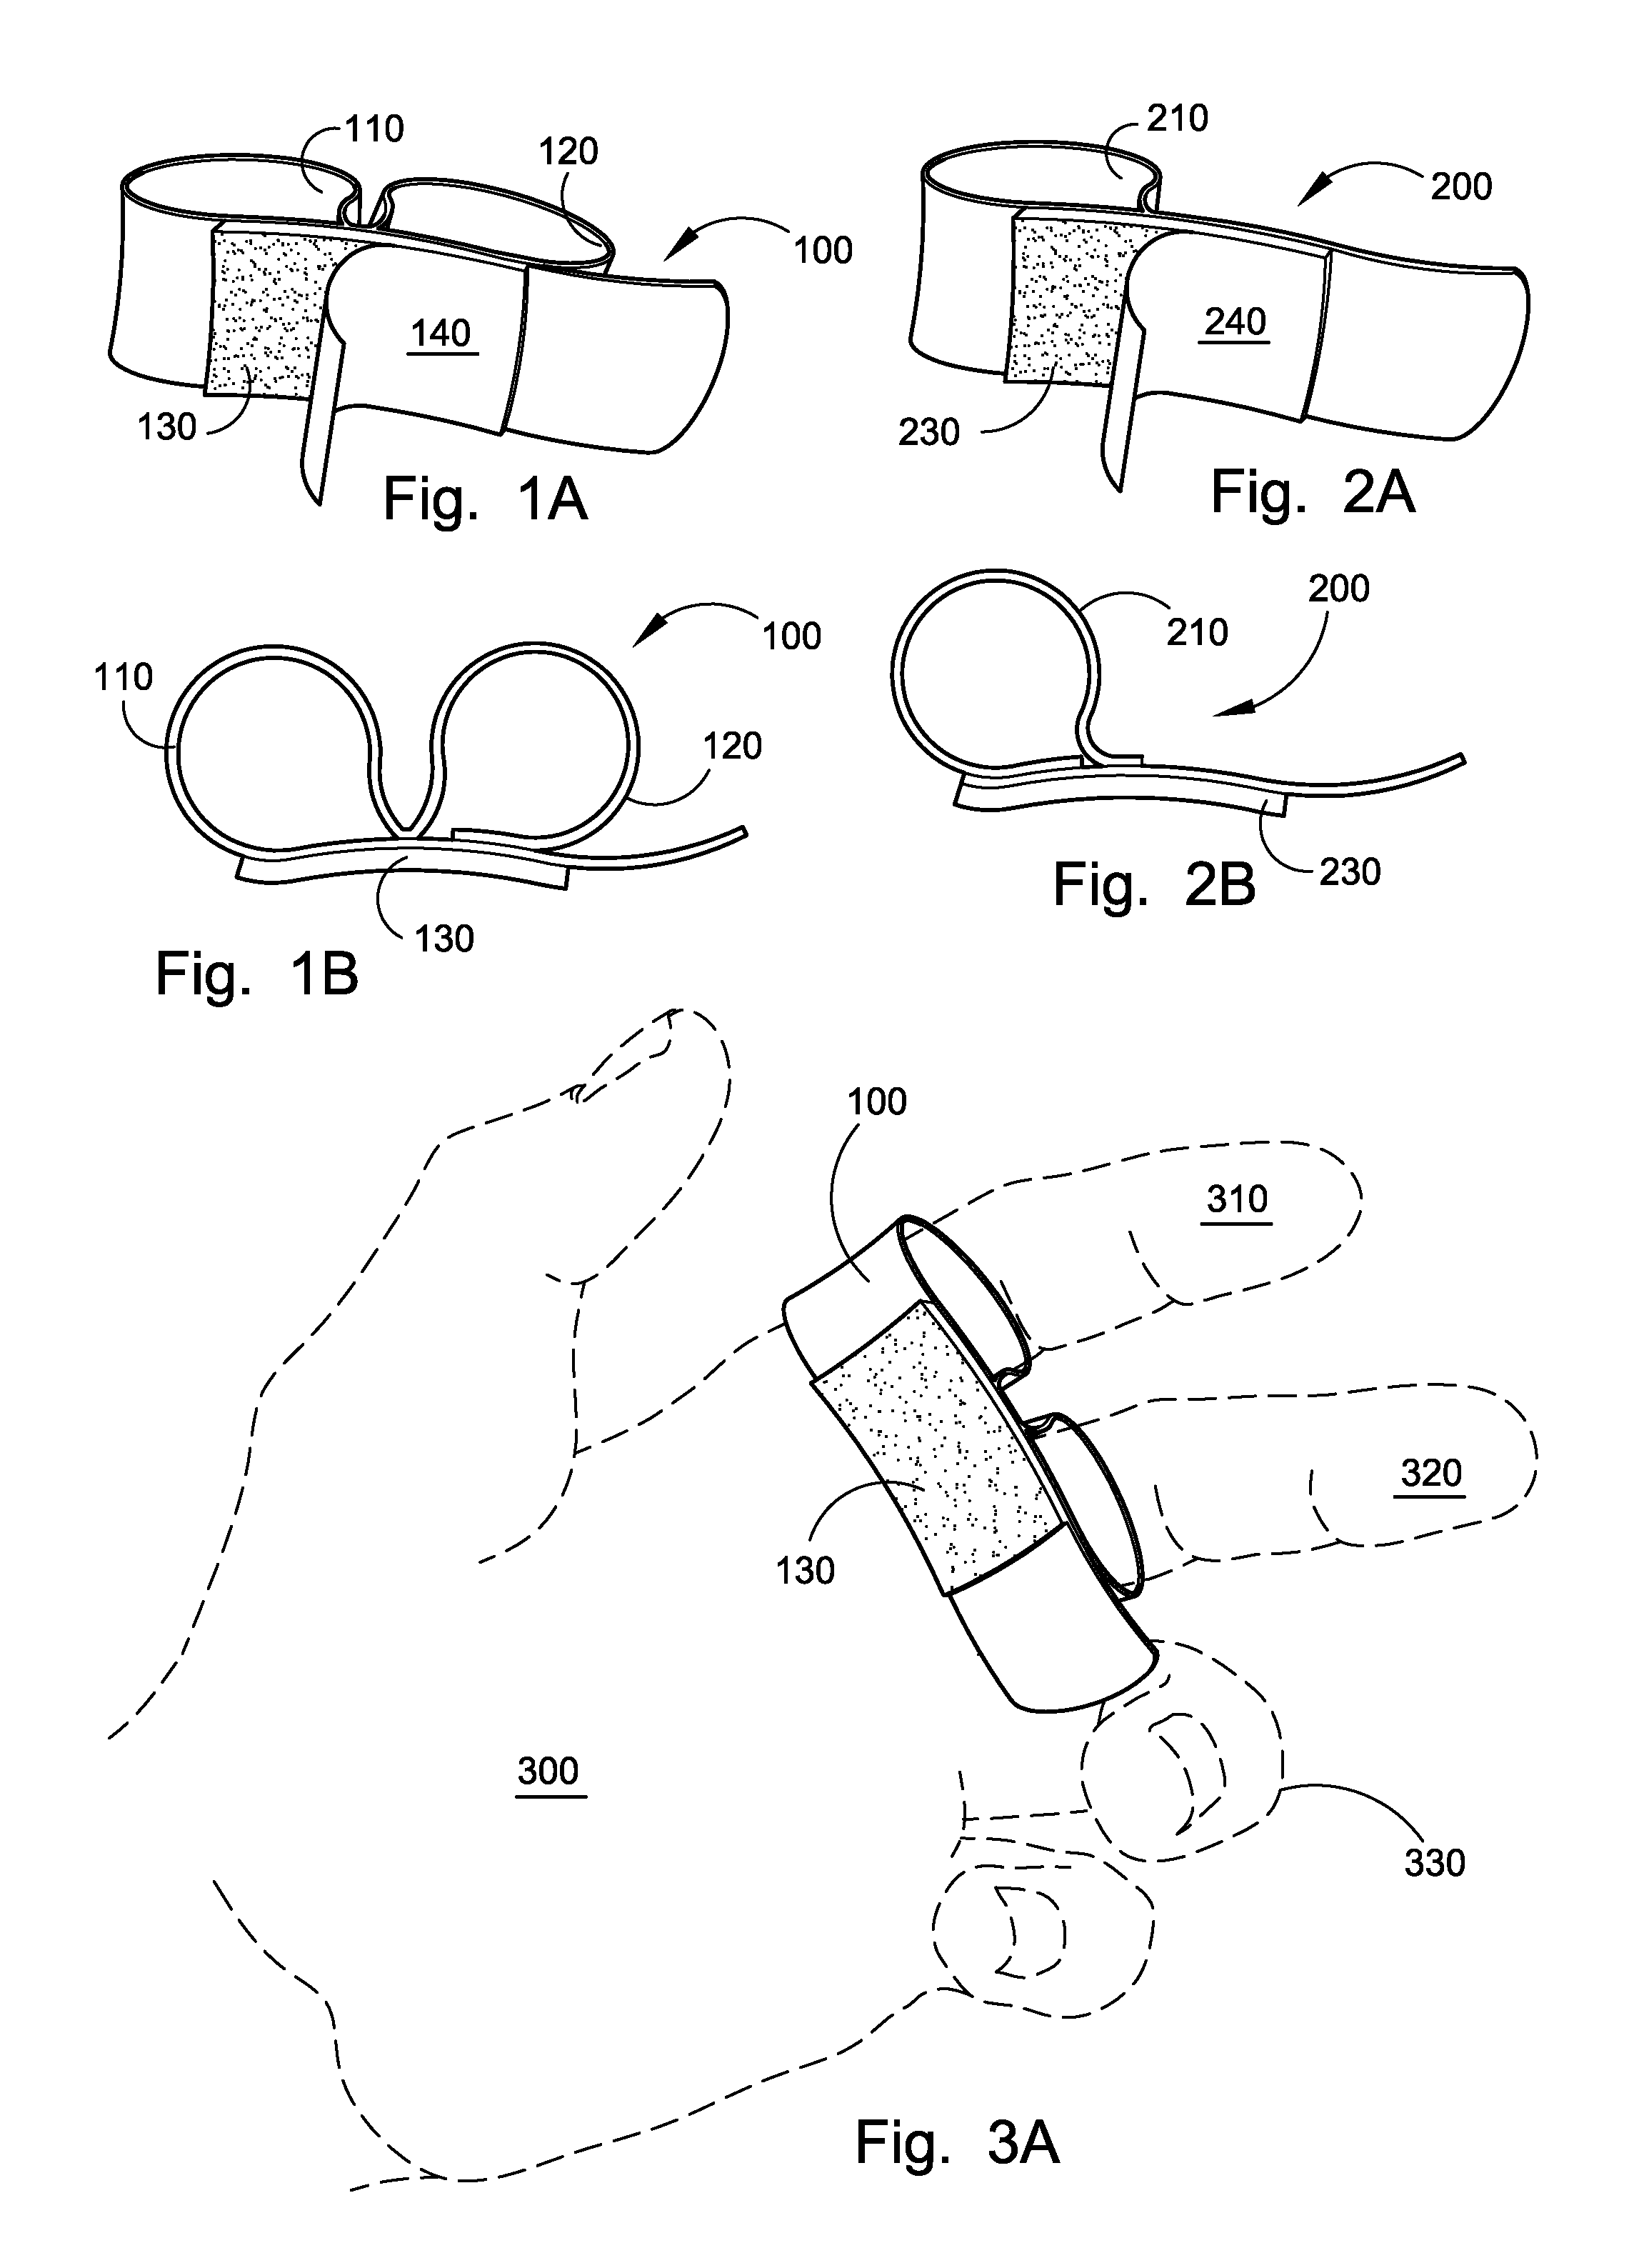 Accessory for handheld electronic device